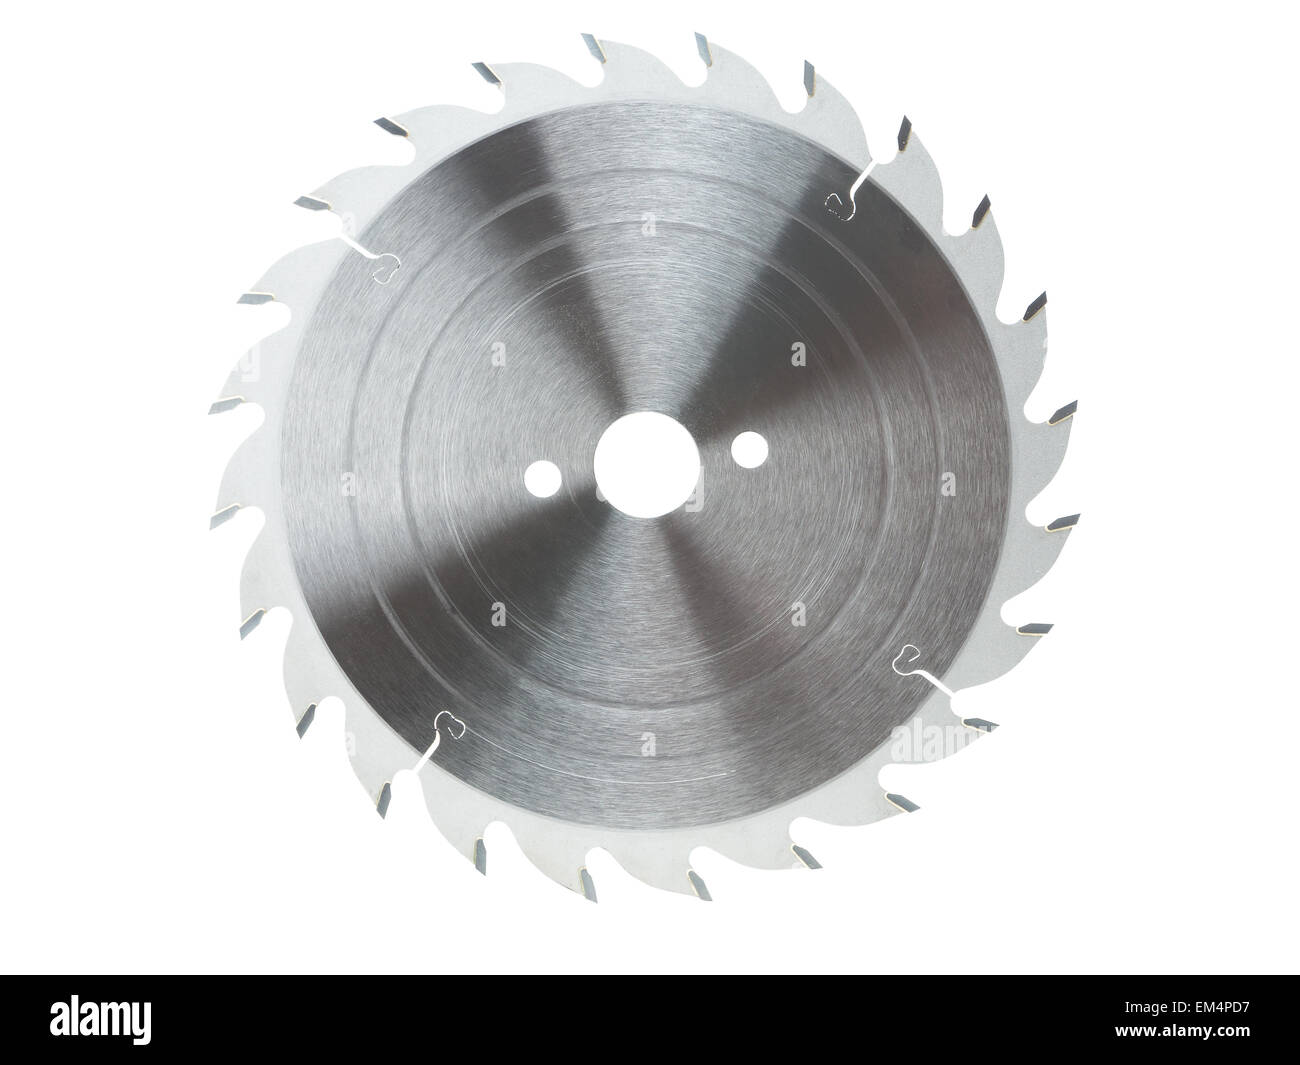 Circular saw blade isolated on white Stock Photo